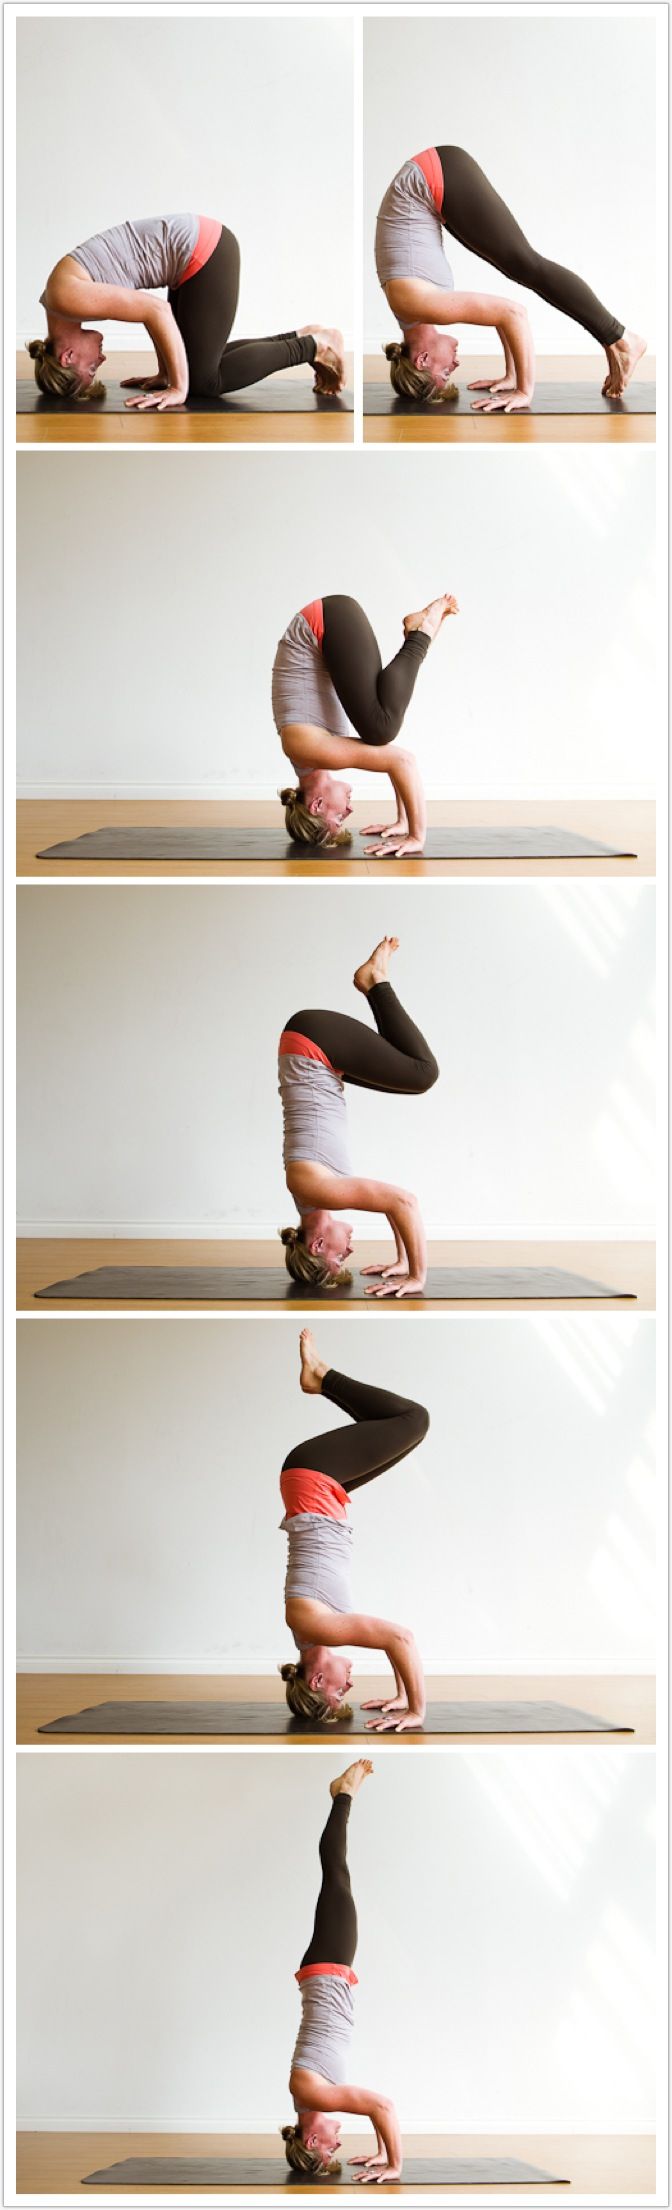 5 Steps to Headstand